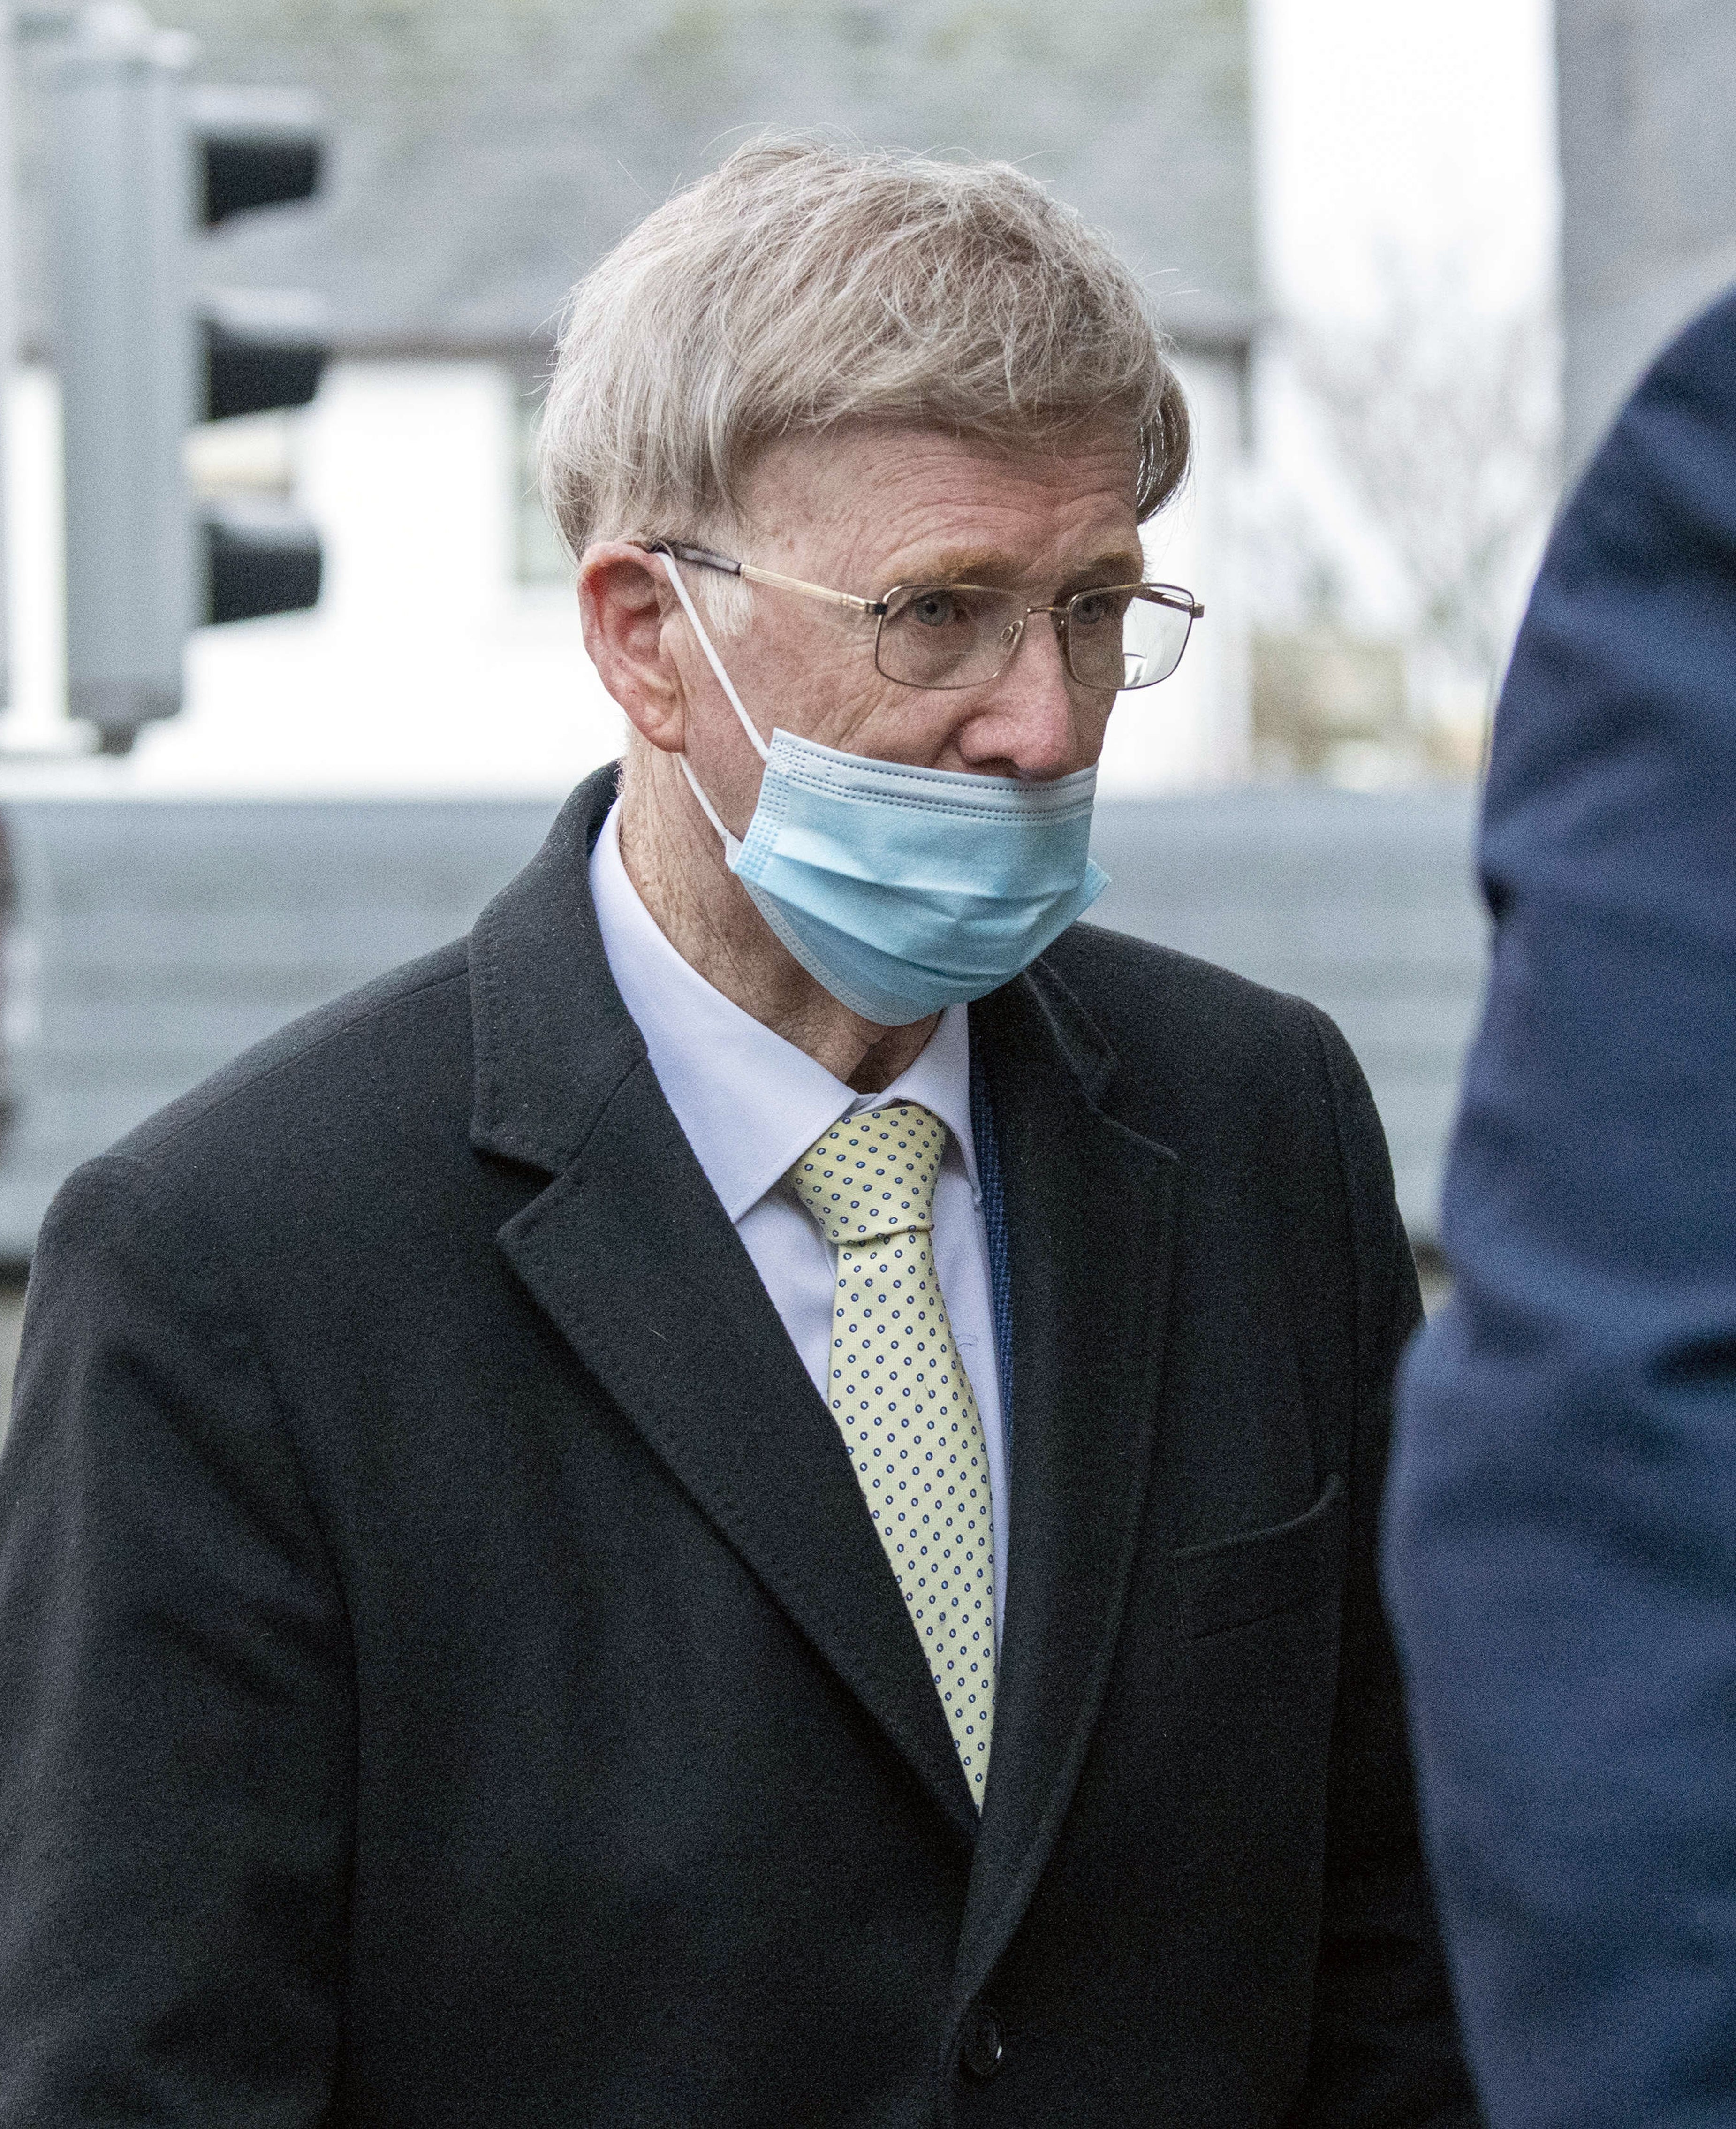 Donie Cassidy, 75, arriving at court (PA)